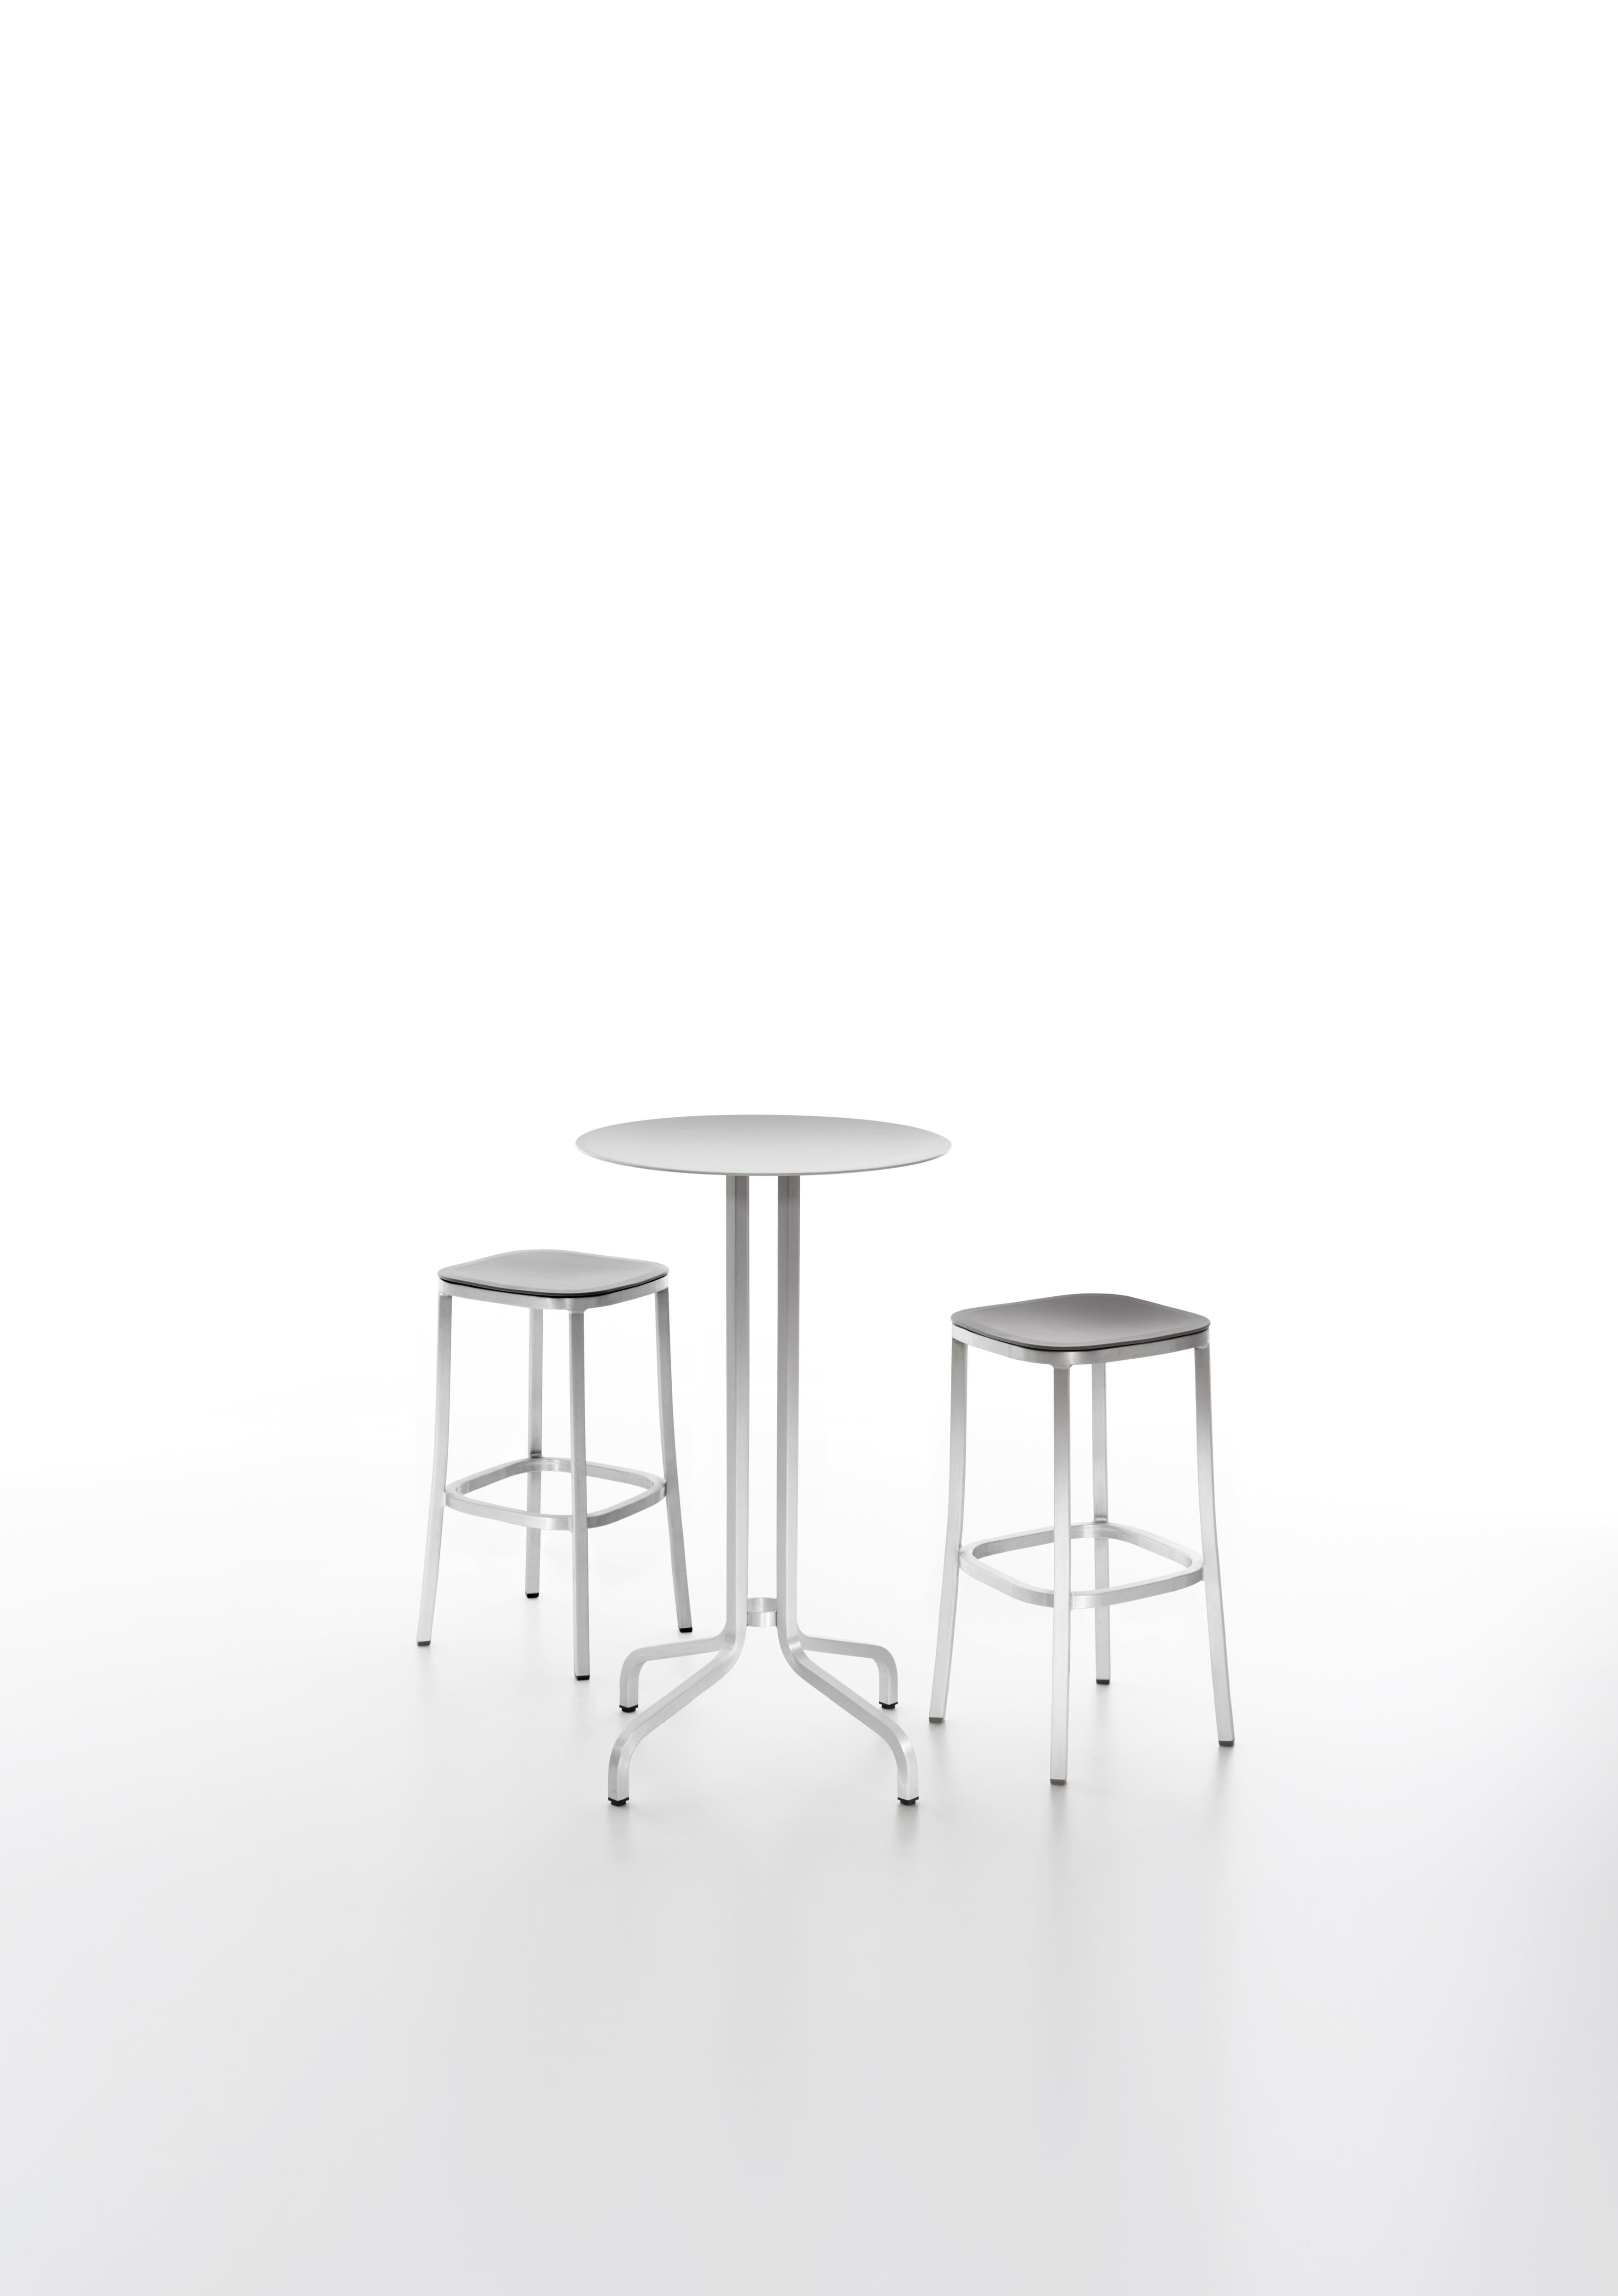 Emeco 1 Inch Counter Stool in Brushed Aluminum and Bordeaux by Jasper Morrison In New Condition For Sale In Hanover, PA